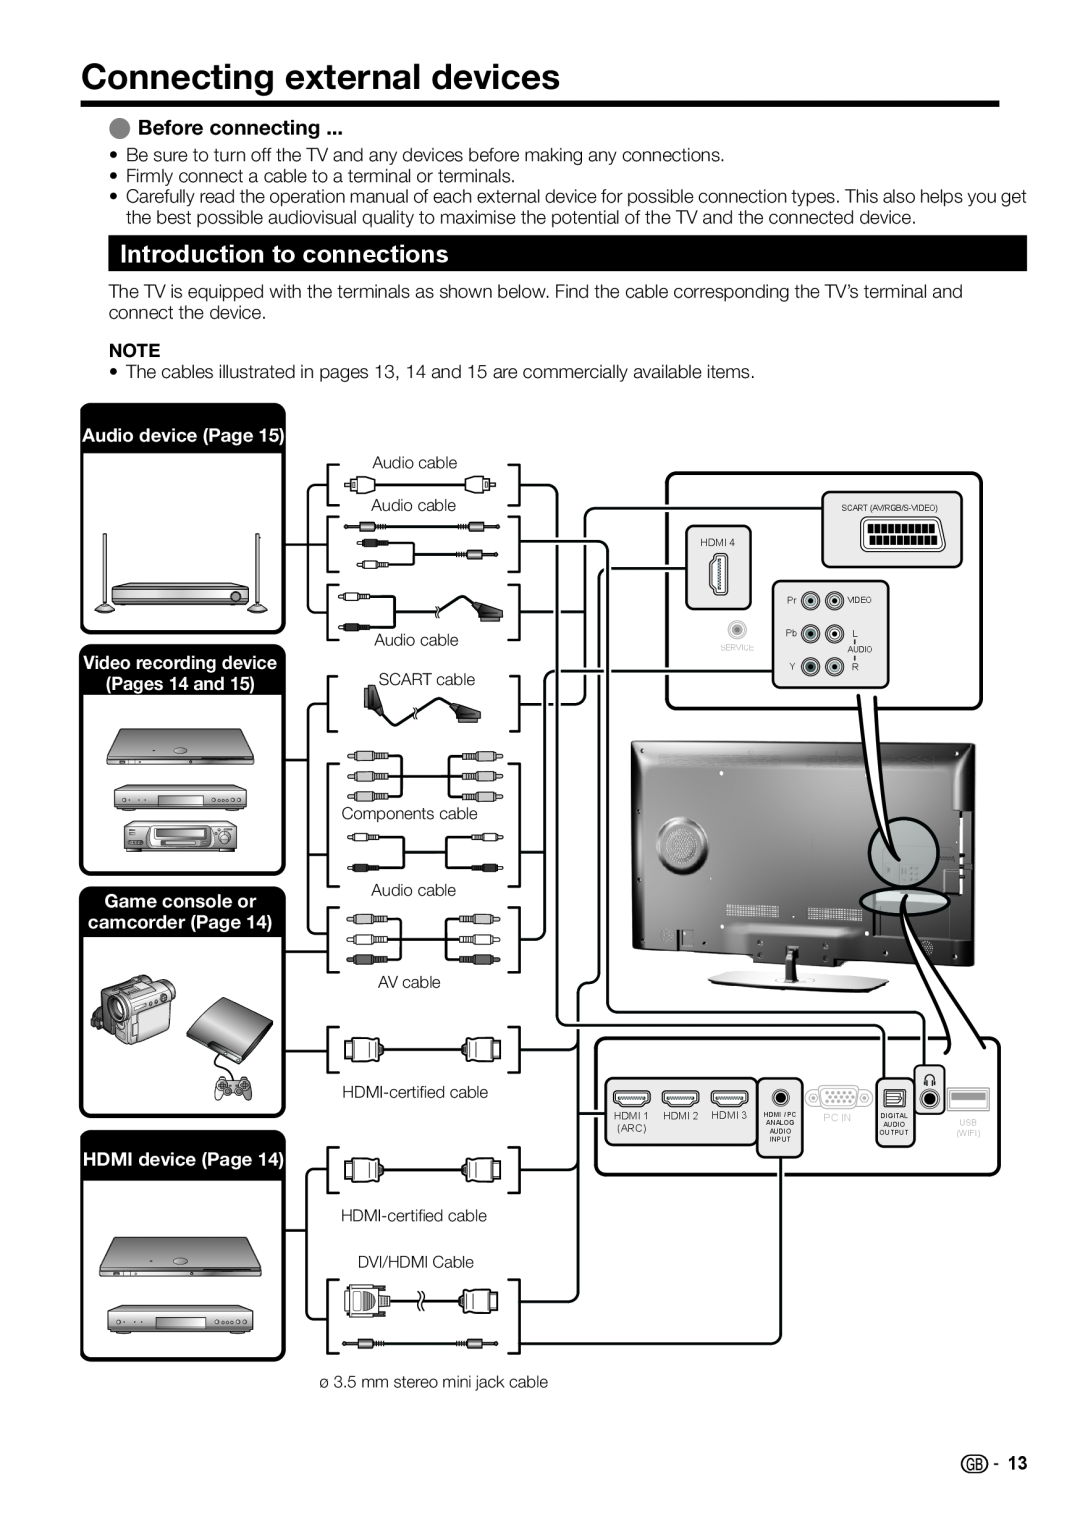 Sharp LC-46LE730E Connecting external devices, Introduction to connections, E Before connecting, Audio device Page 